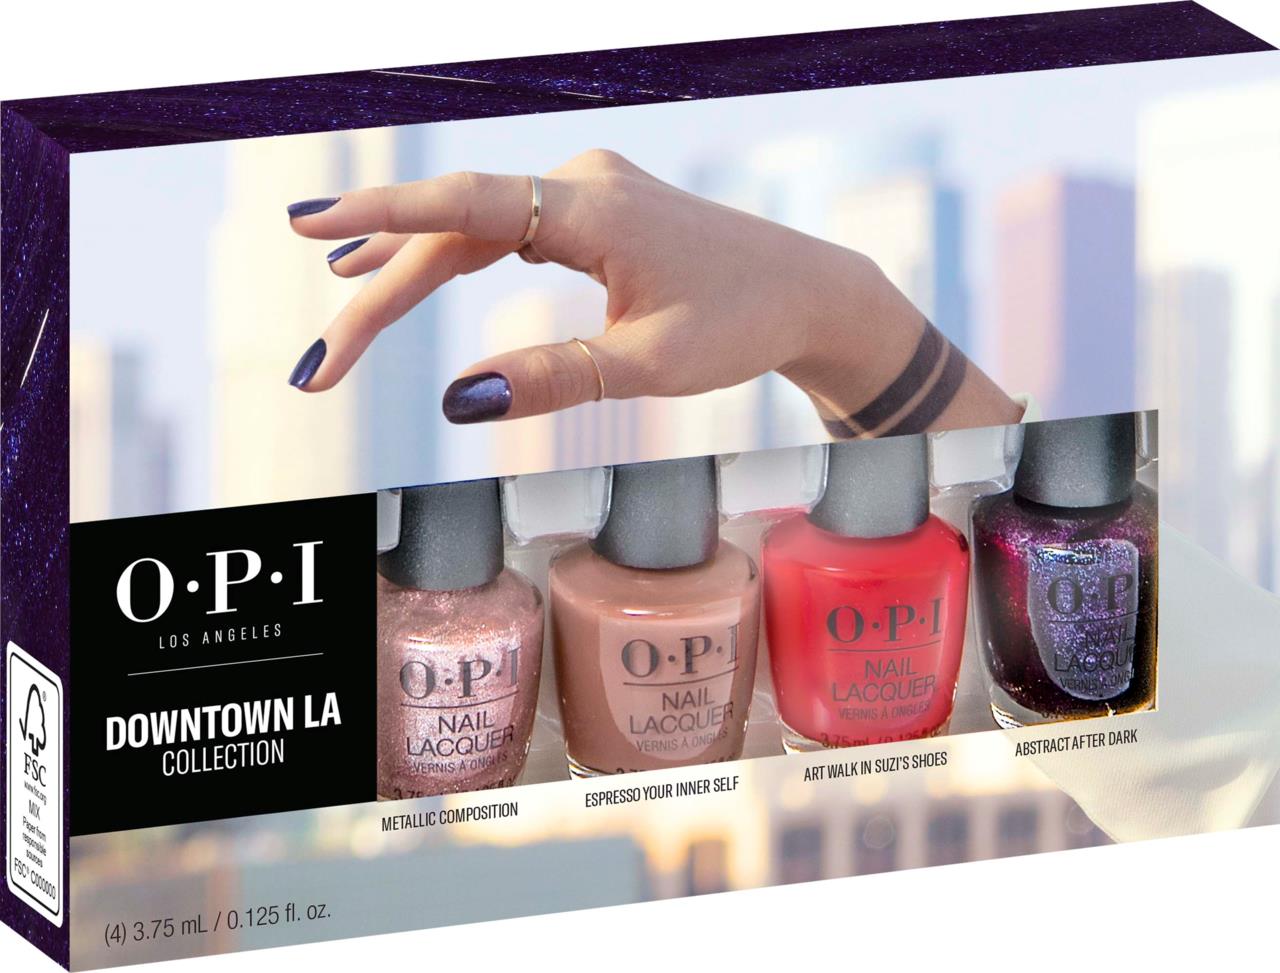 7. OPI Nail Lacquer in "I Sea You Wear OPI" - wide 6